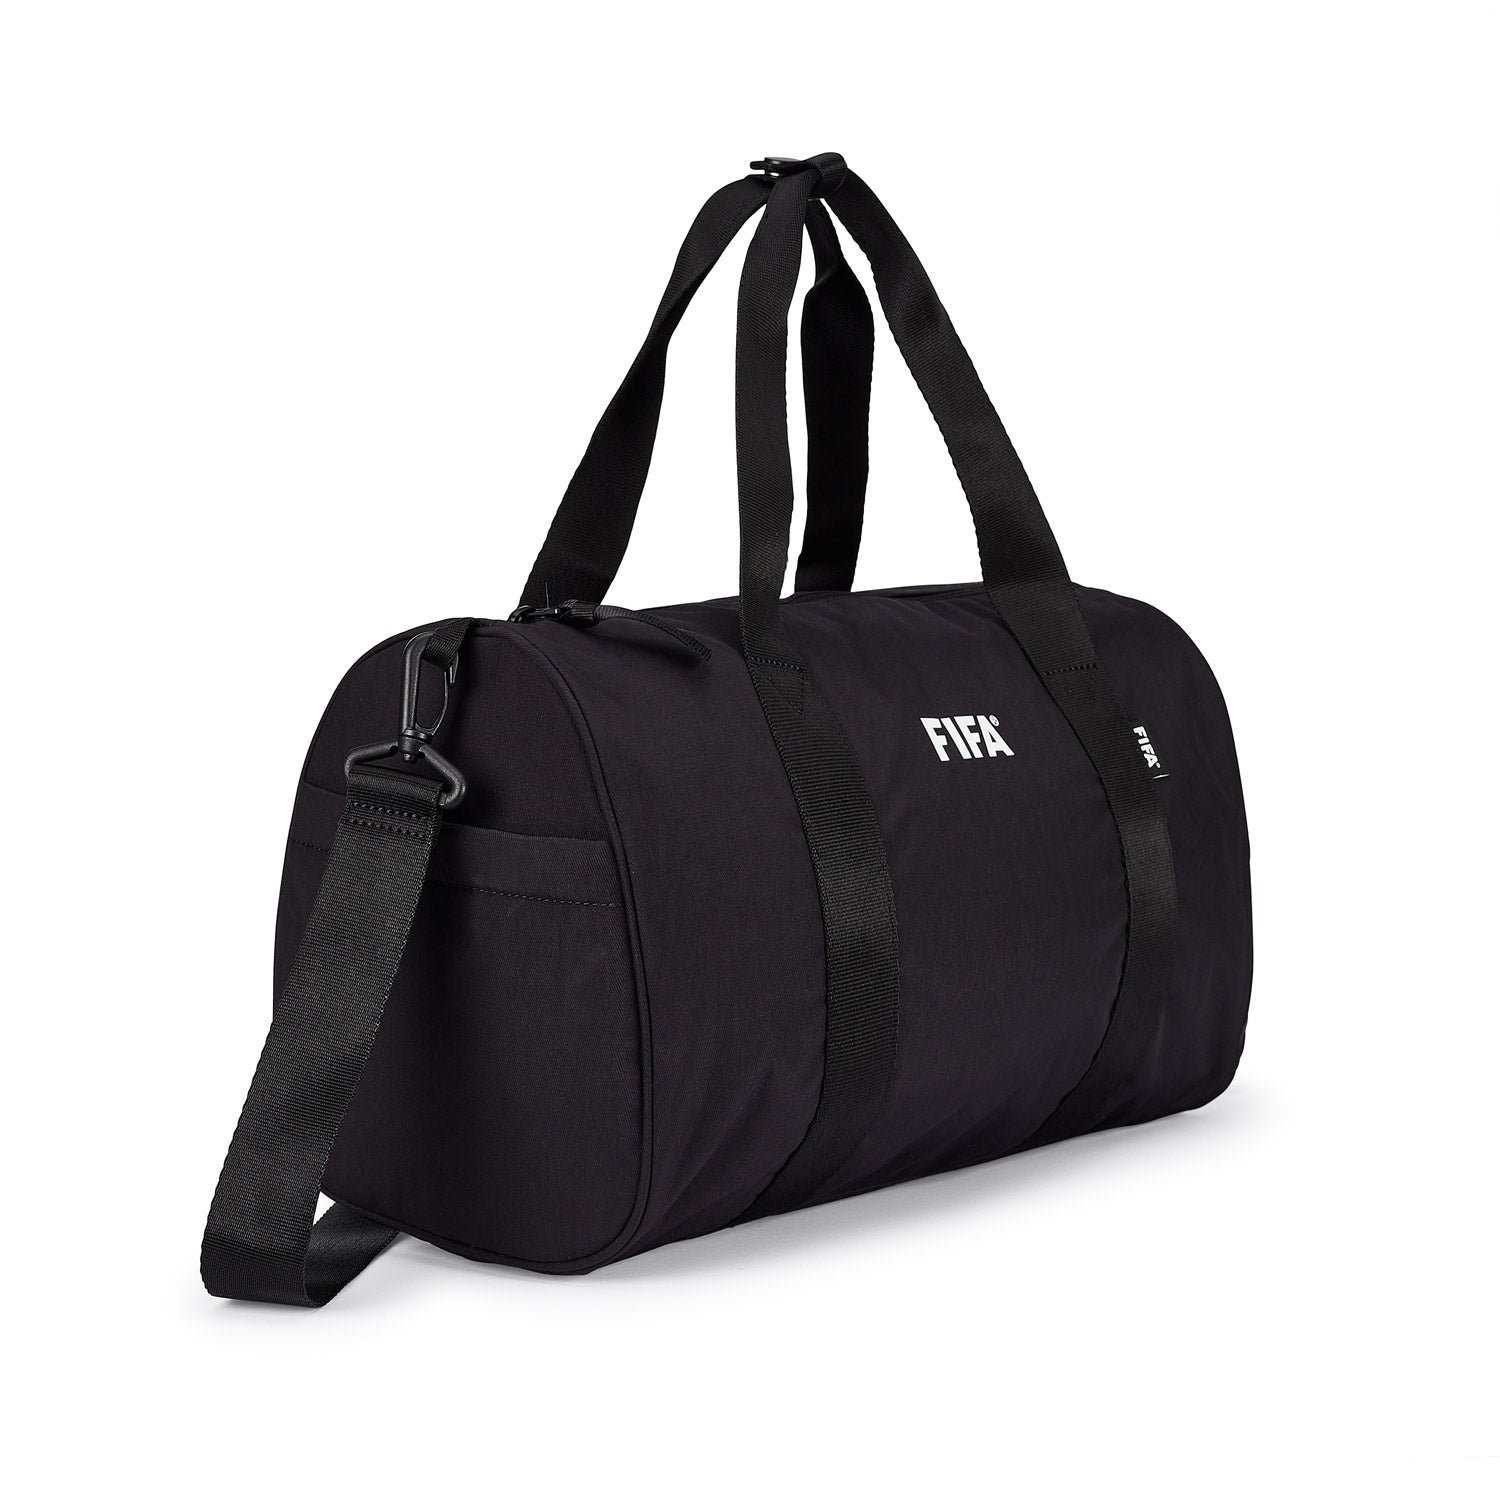 FIFA Store Bags For Sale - Up to 70% Off - Official FIFA Store